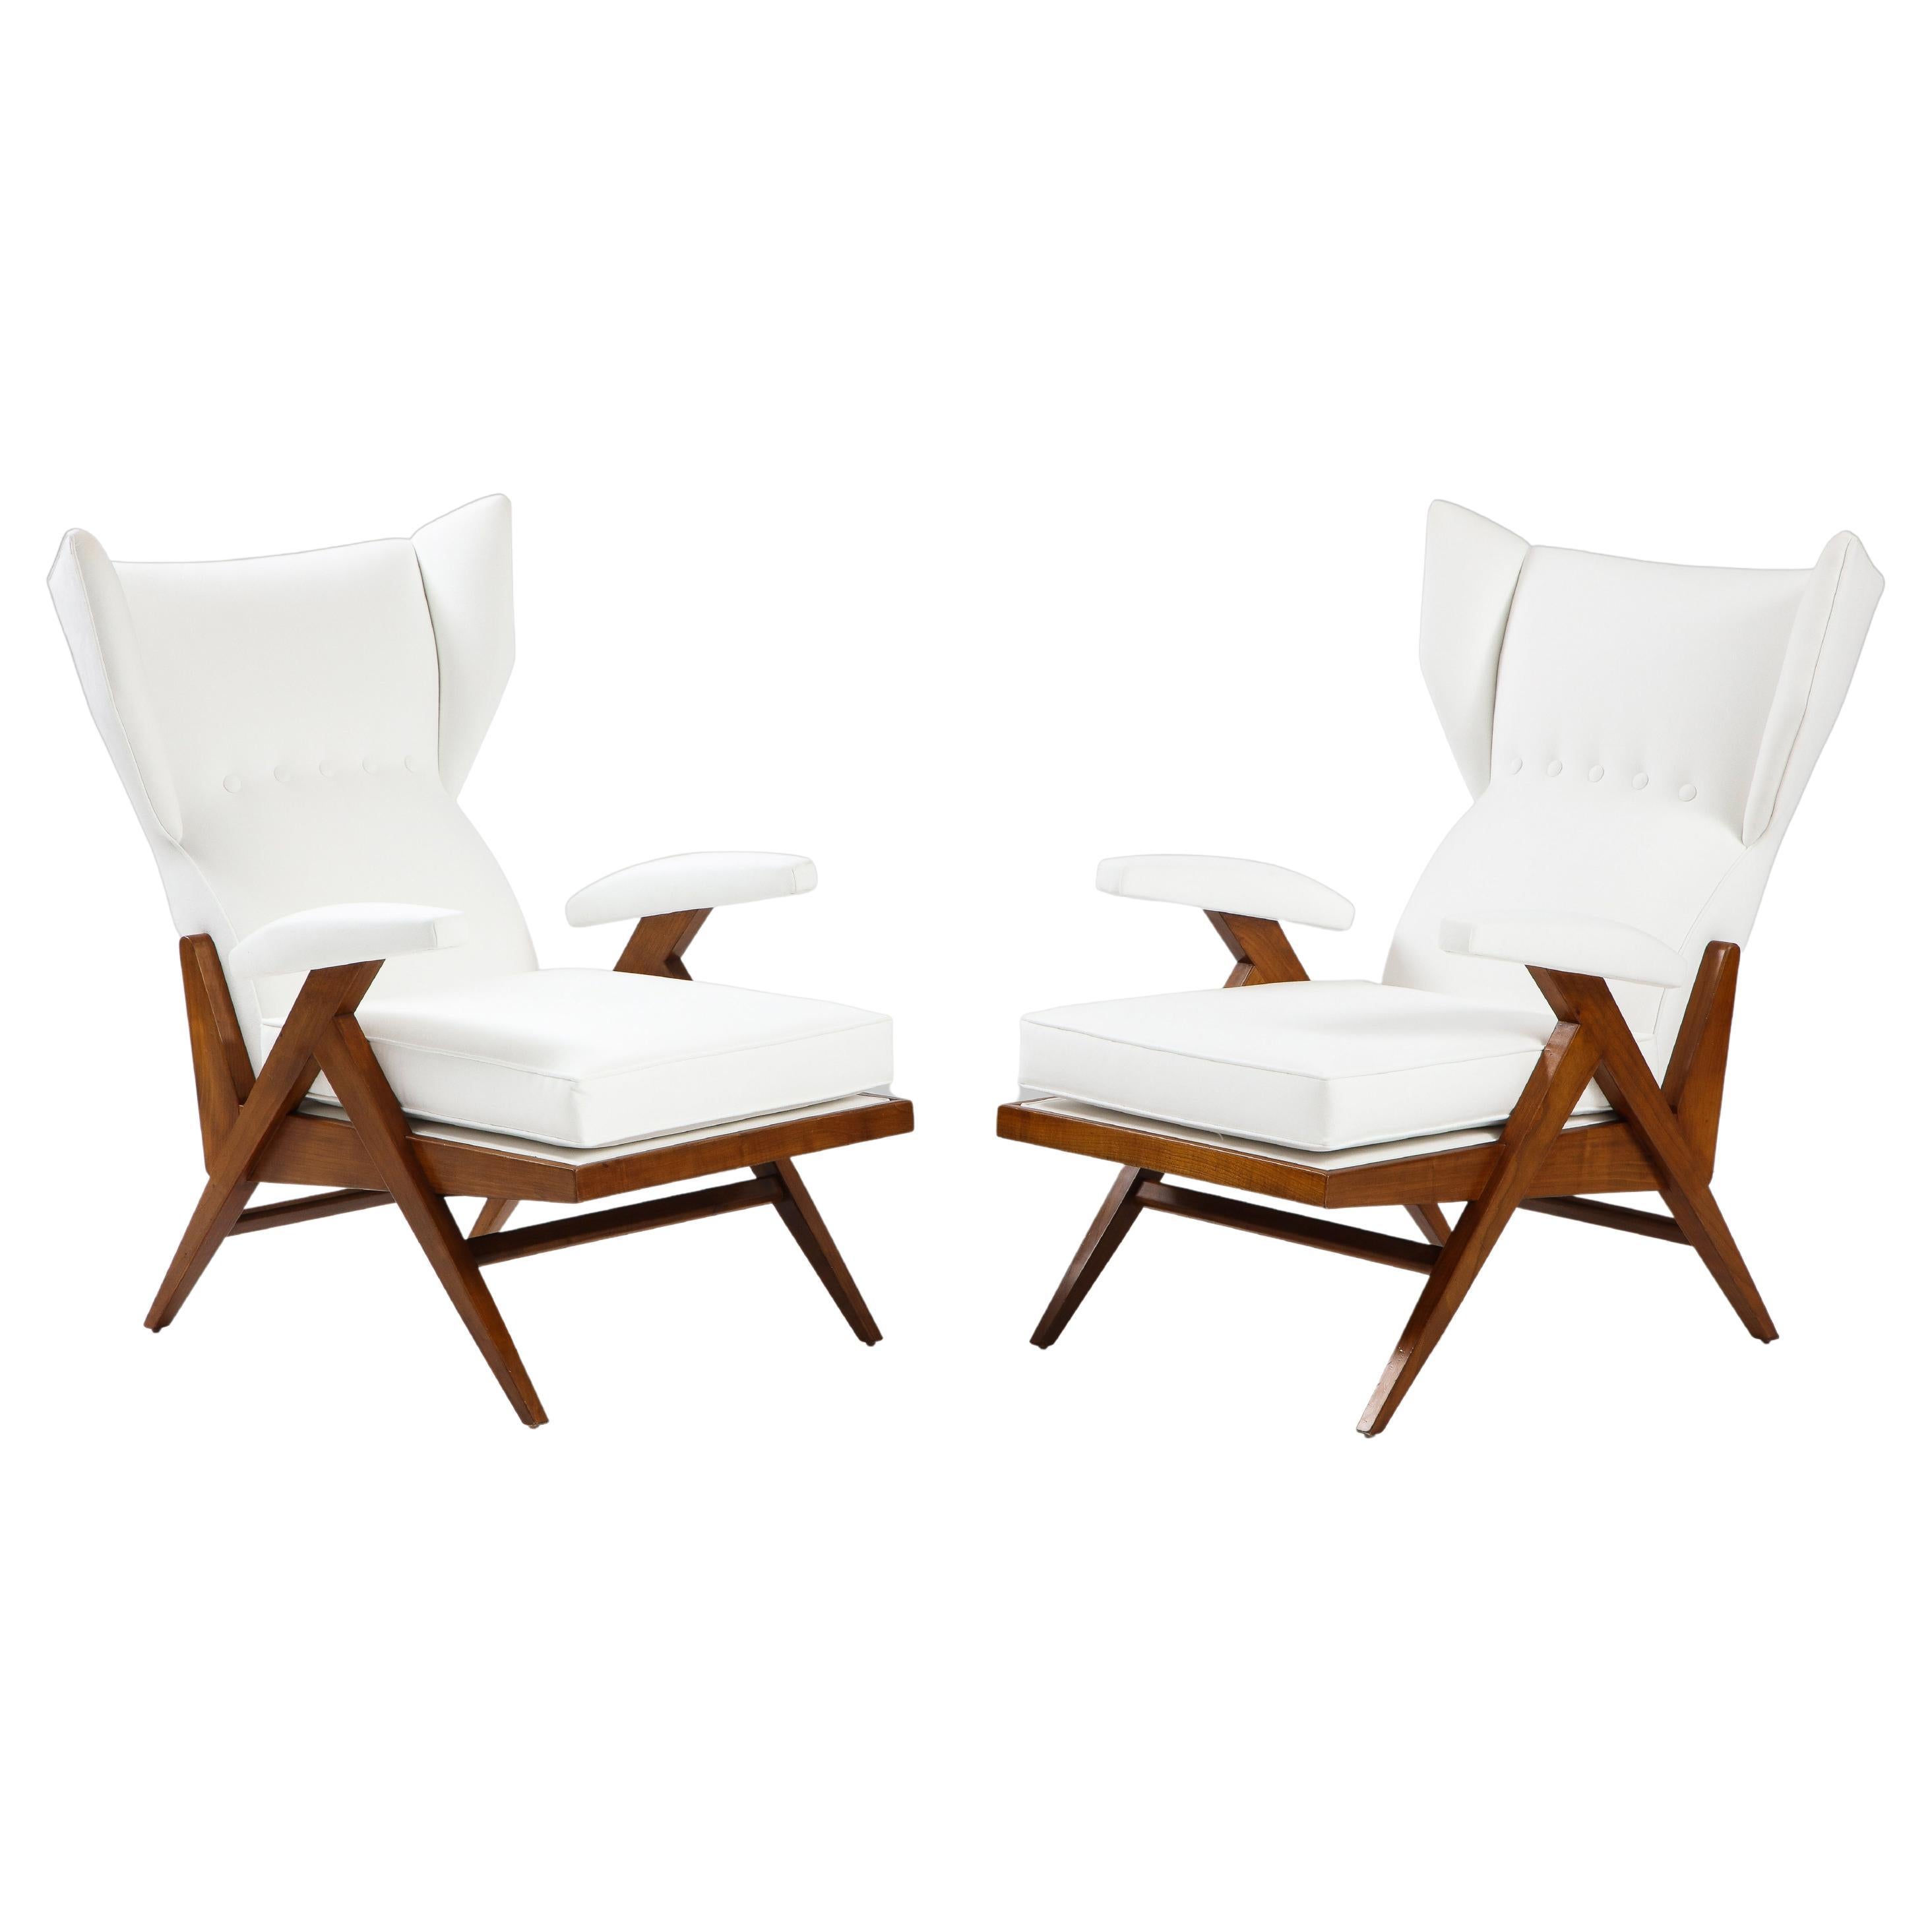 Renzo Franchi for Camerani Rare Pair of White 'Camea' Lounge Chairs 1950s